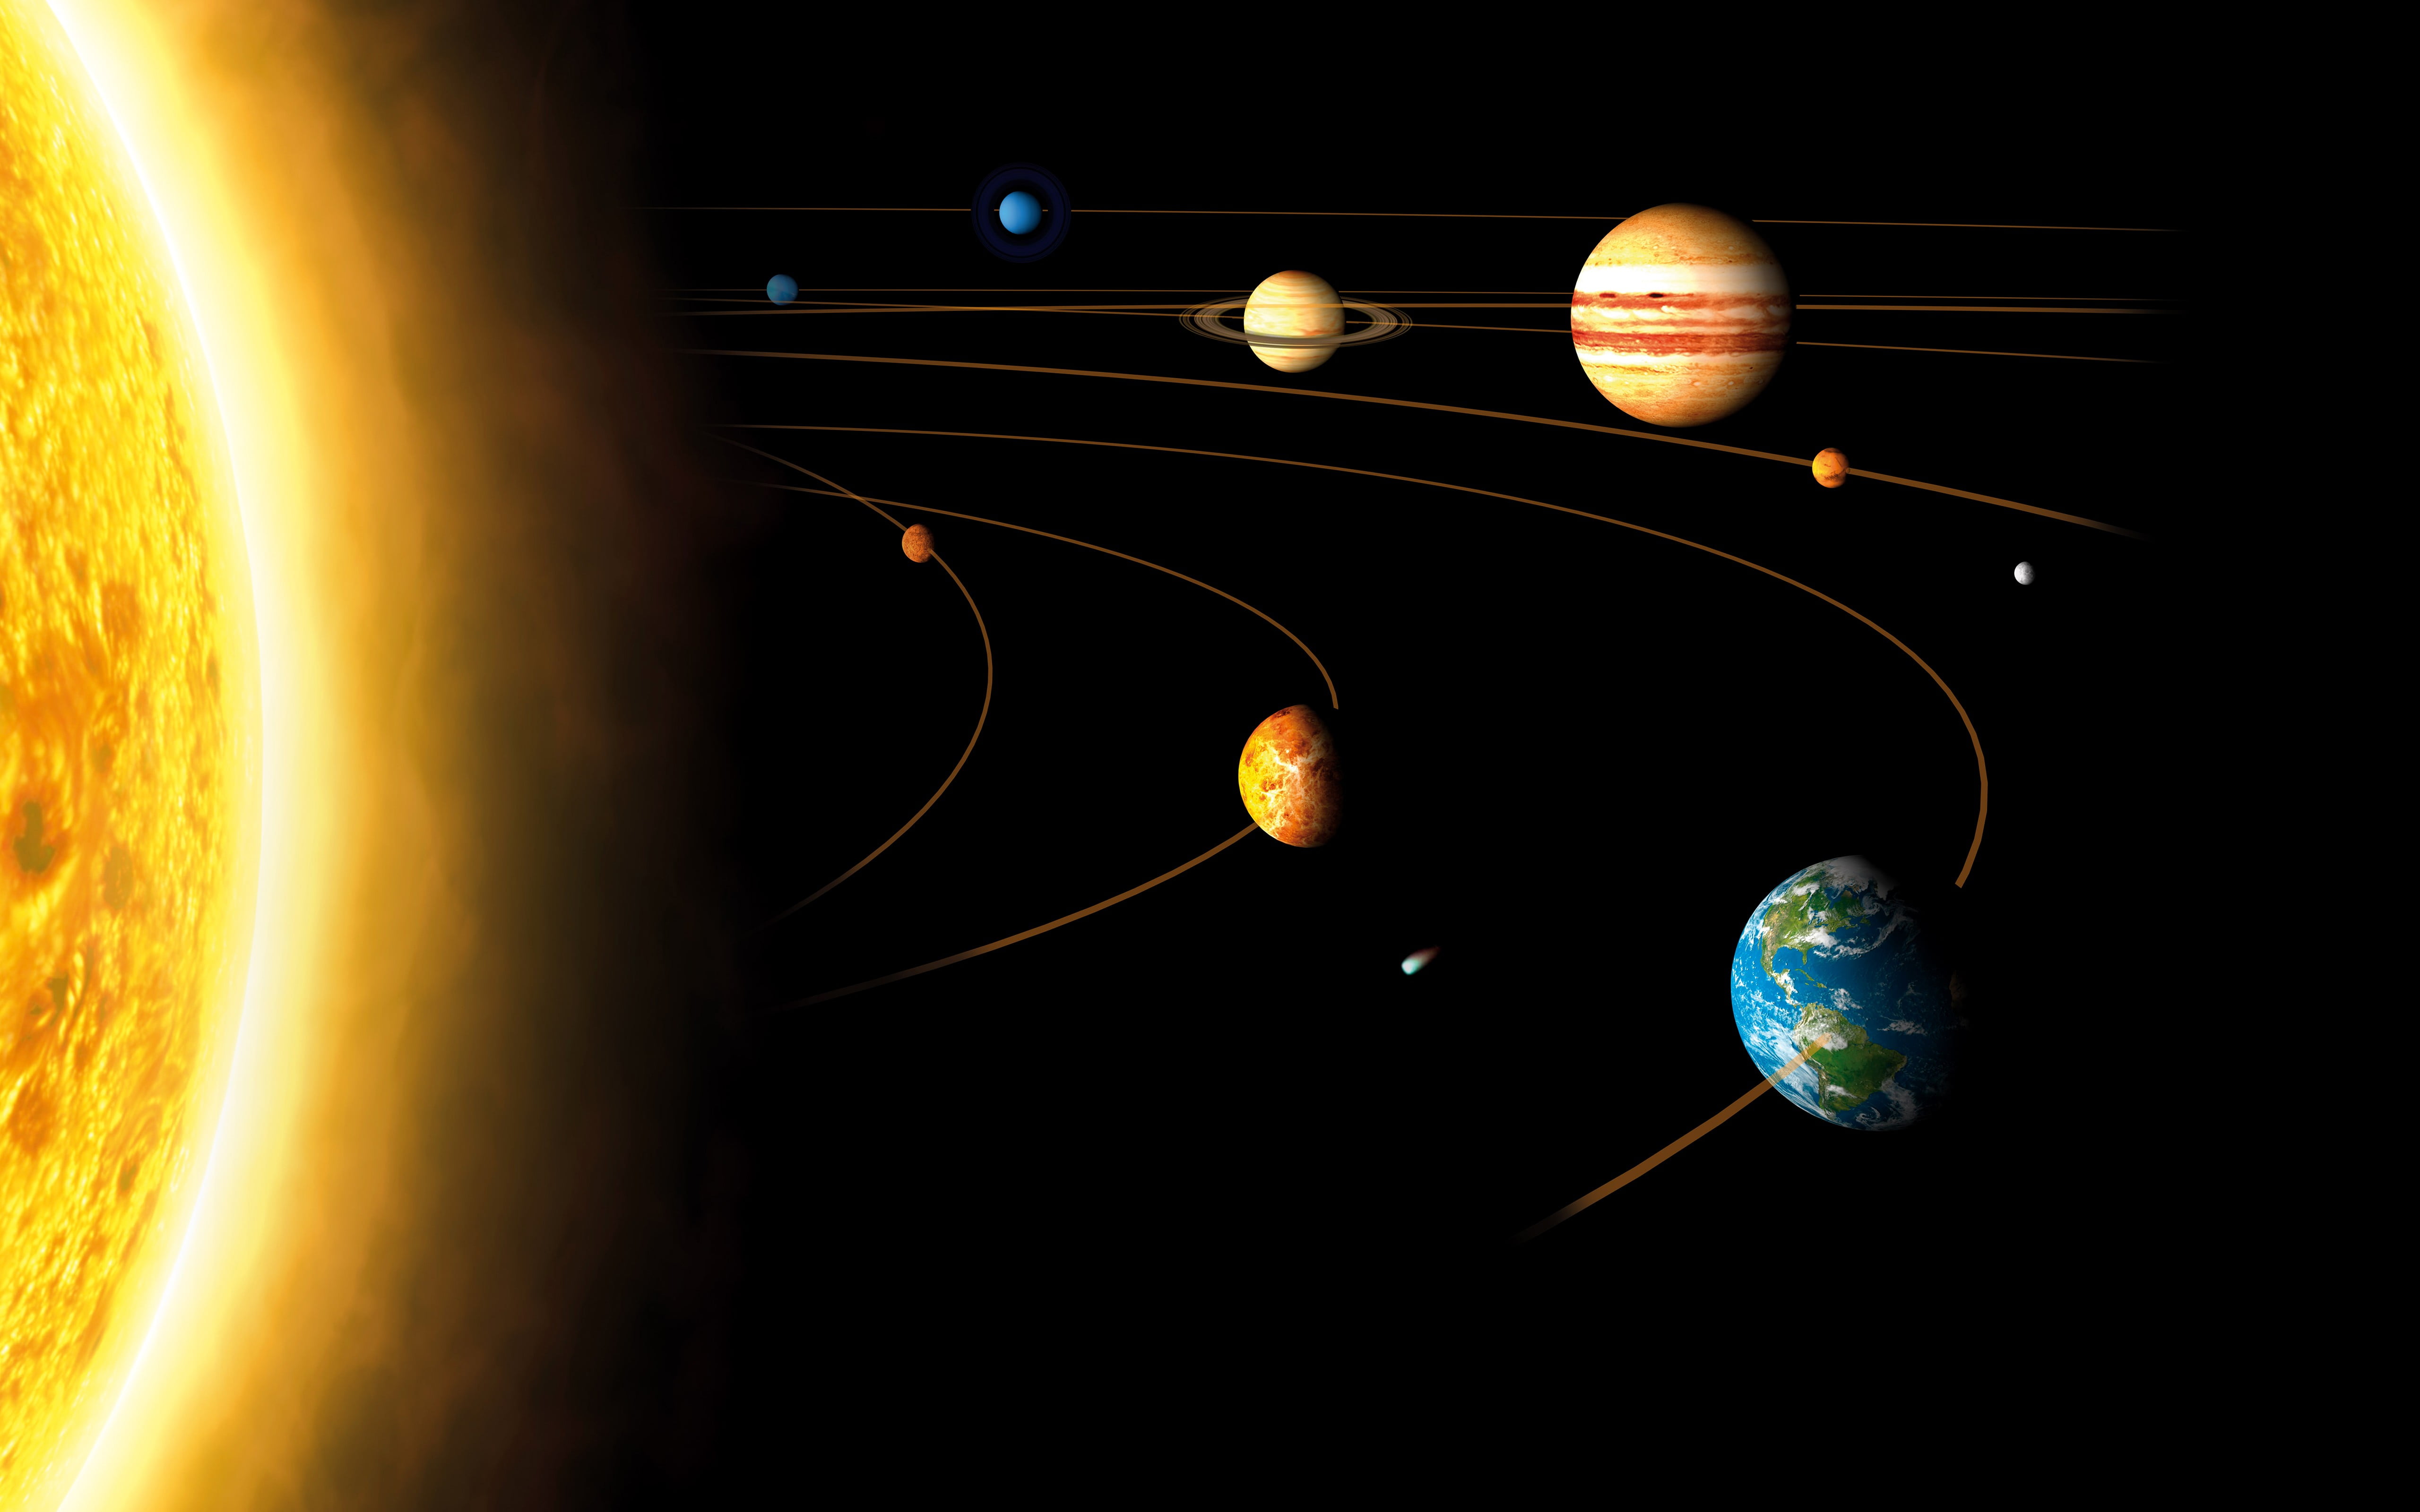 Solar System Digital Wallpaper Space Earth Sun Solar System Planets Images